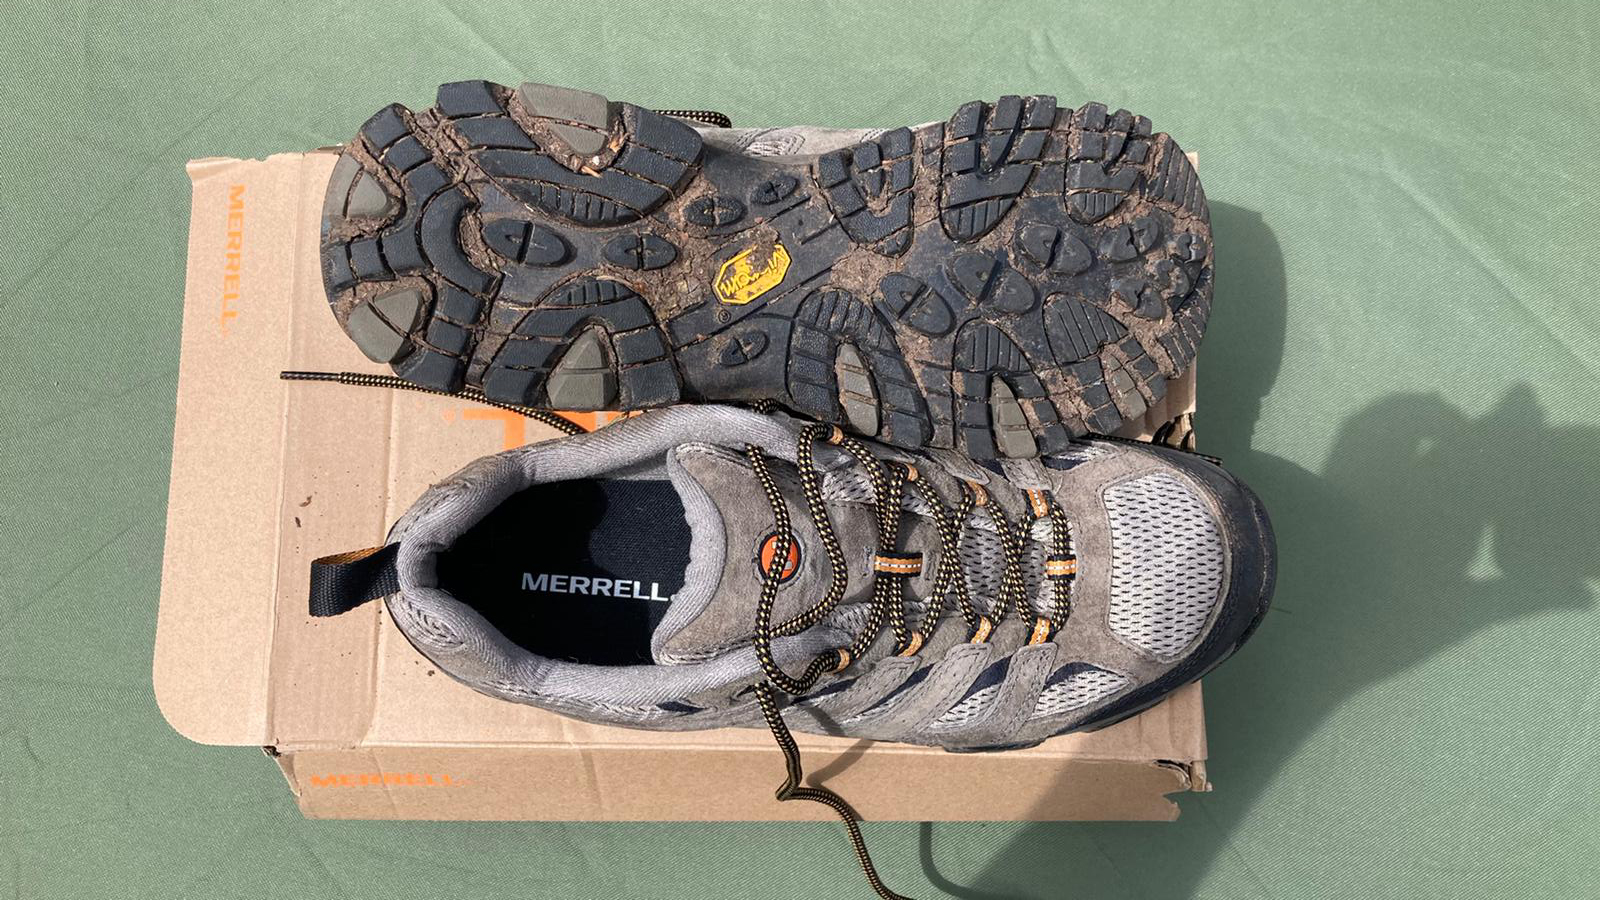 Merrell Moab 3 walking shoe review | Fit&Well